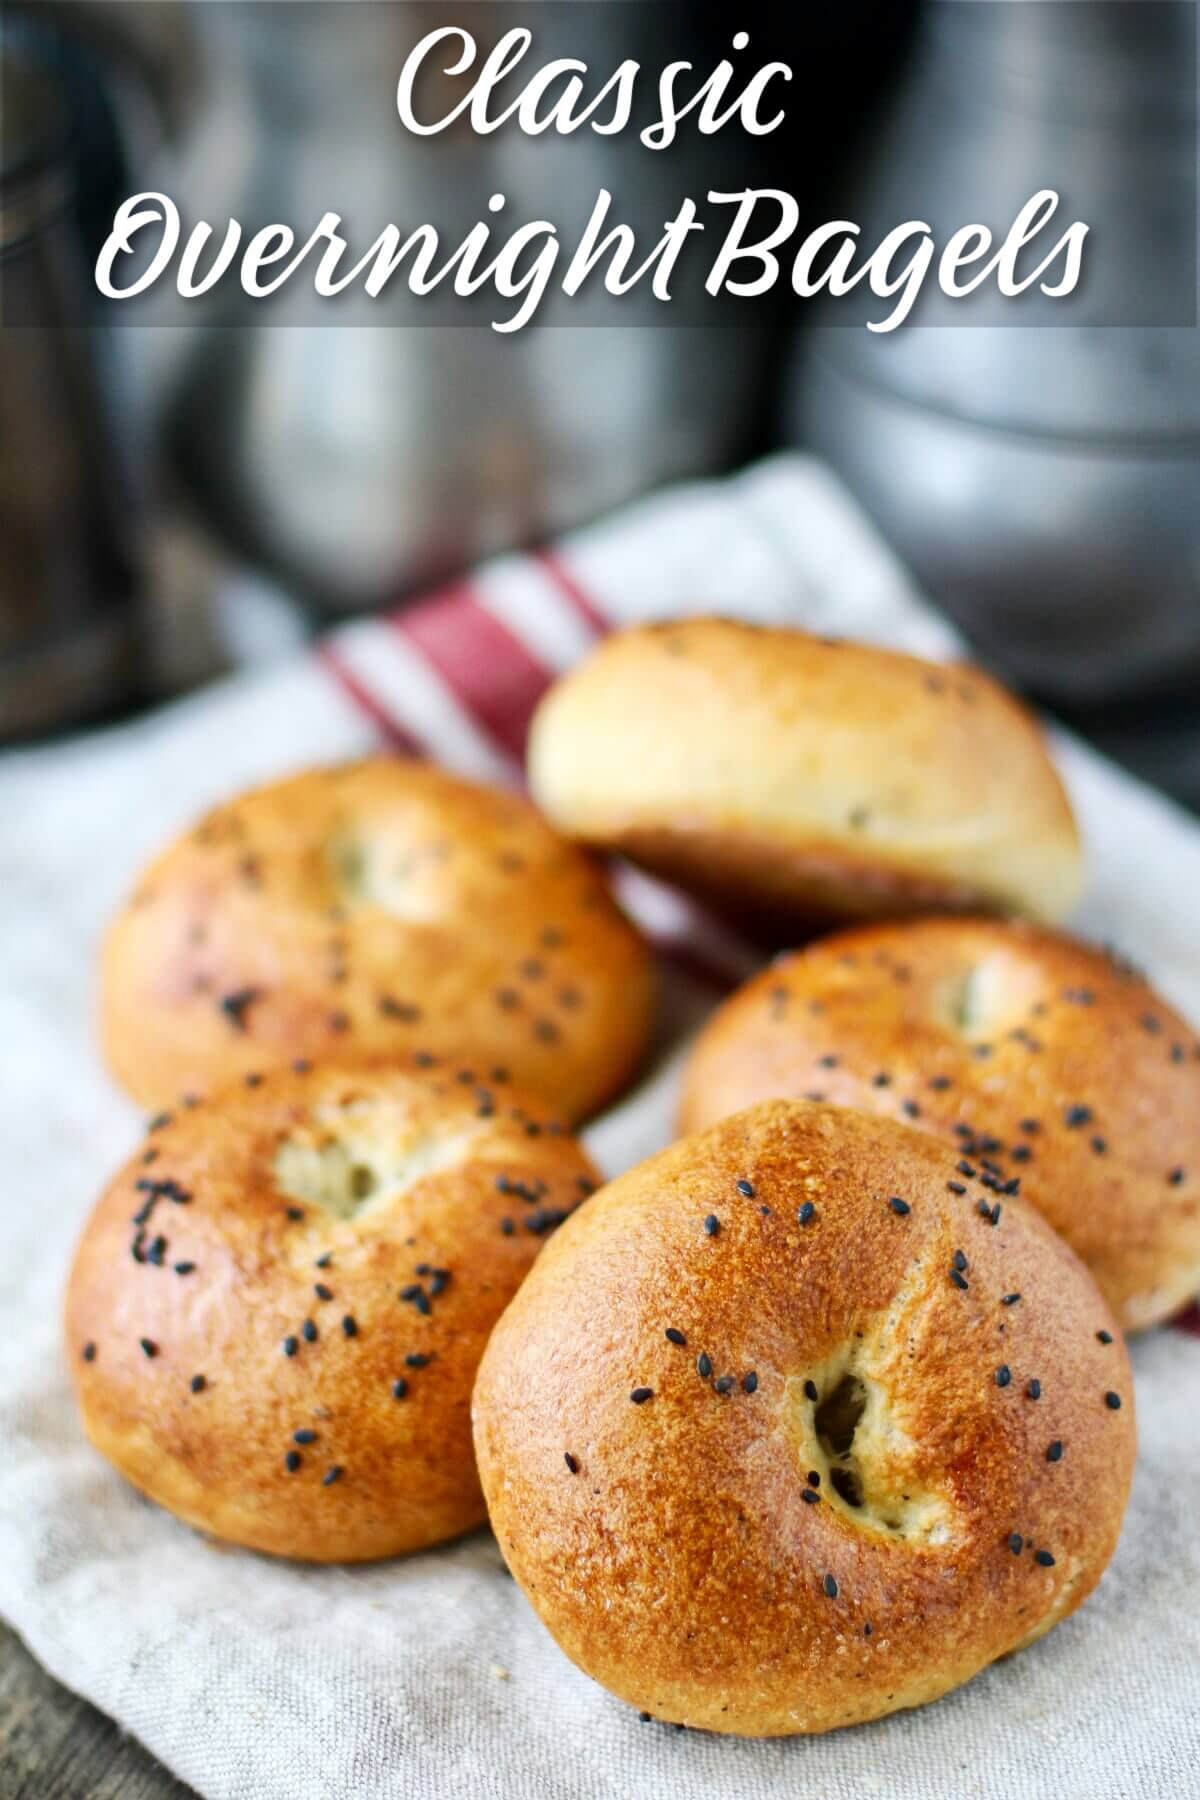 Overnight Bagels with Black Pepper in a basket.